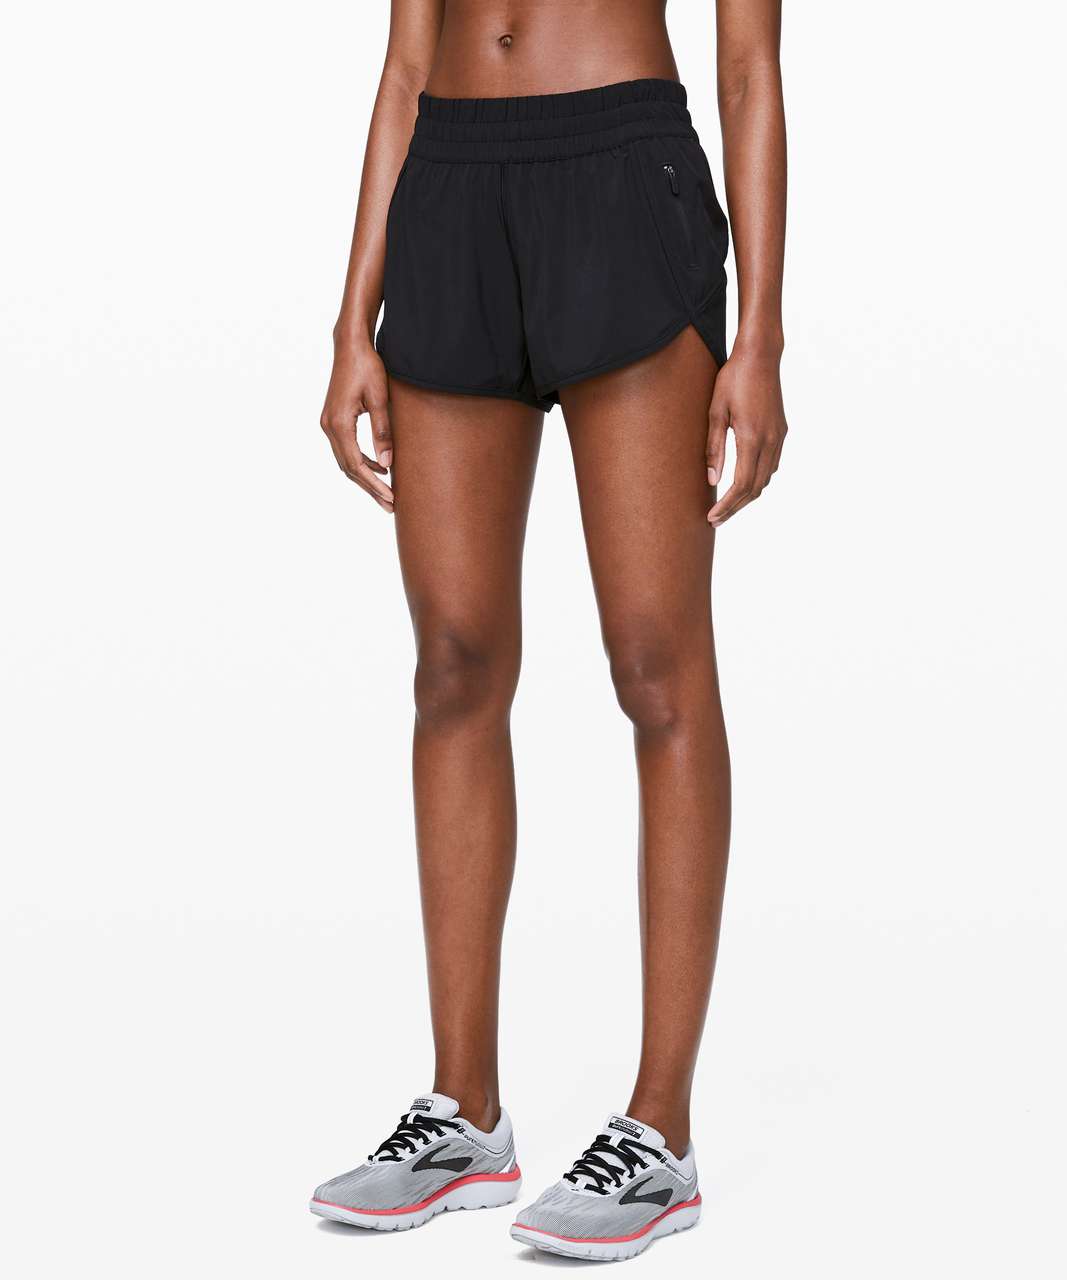 Tracker Shorts V 4'' - Do people typically upsize in this pair of